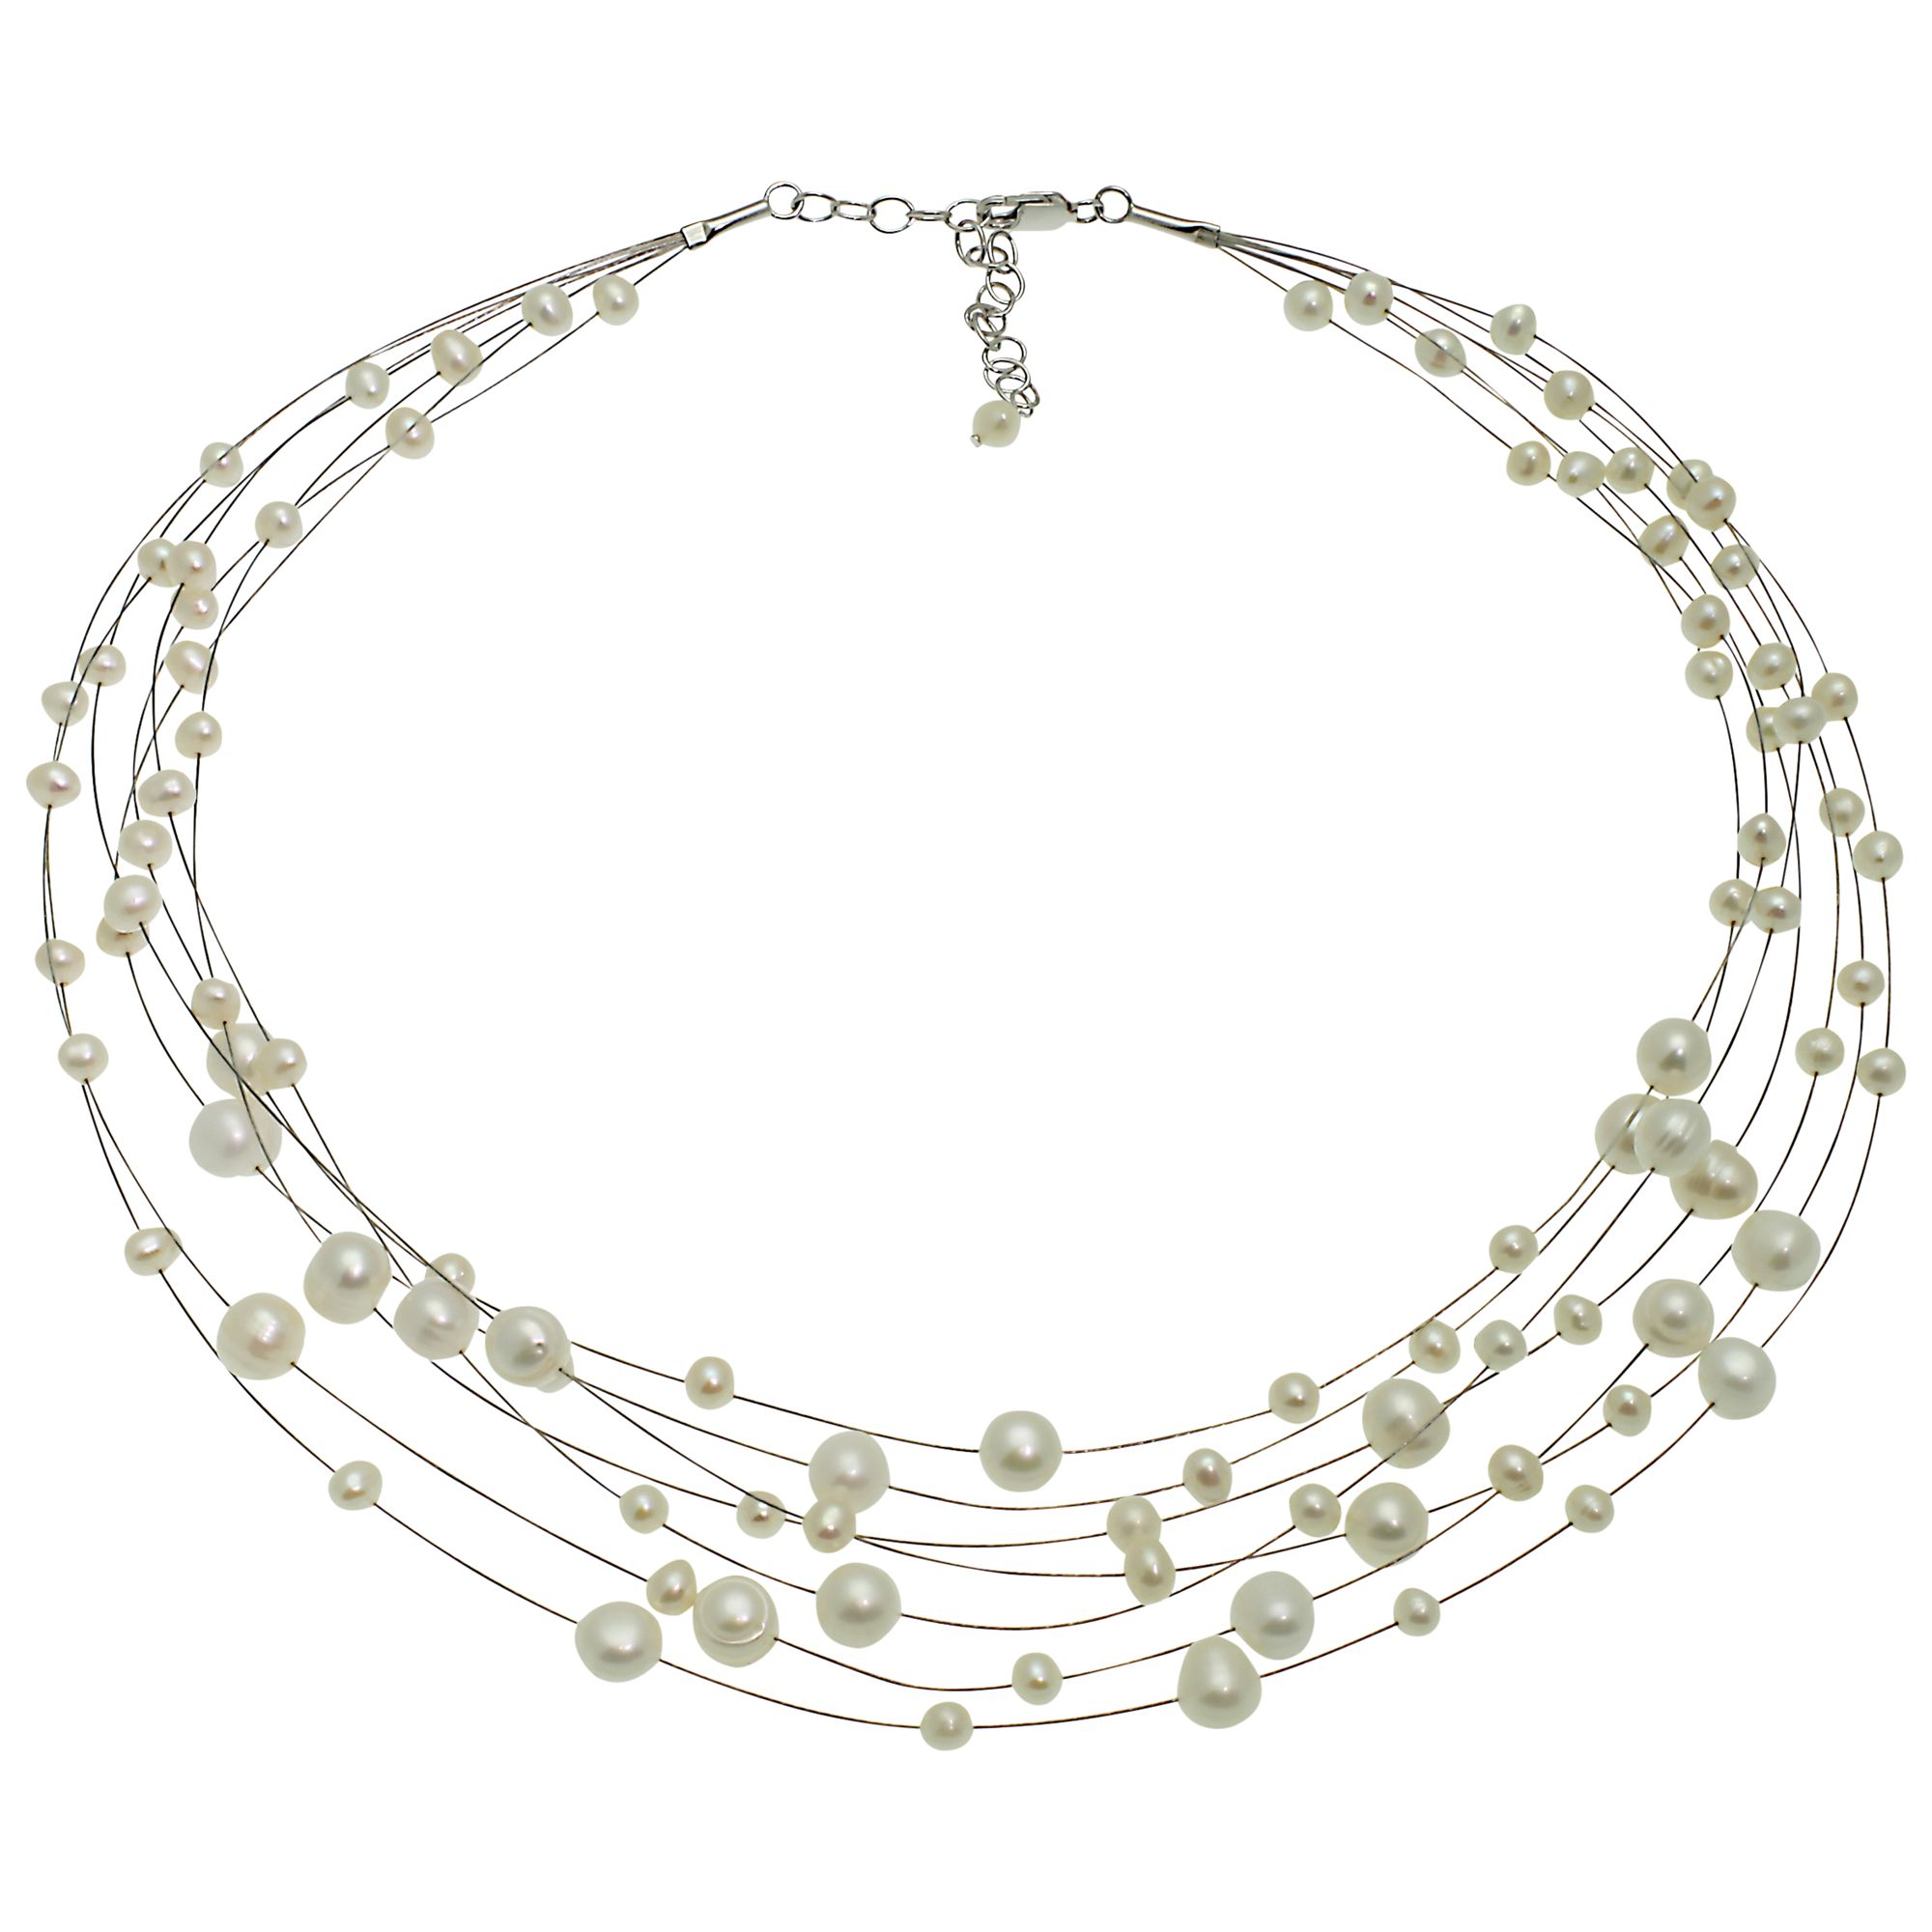 Lido Pearls Lido Multi-Strand Freshwater Pearl Necklace,